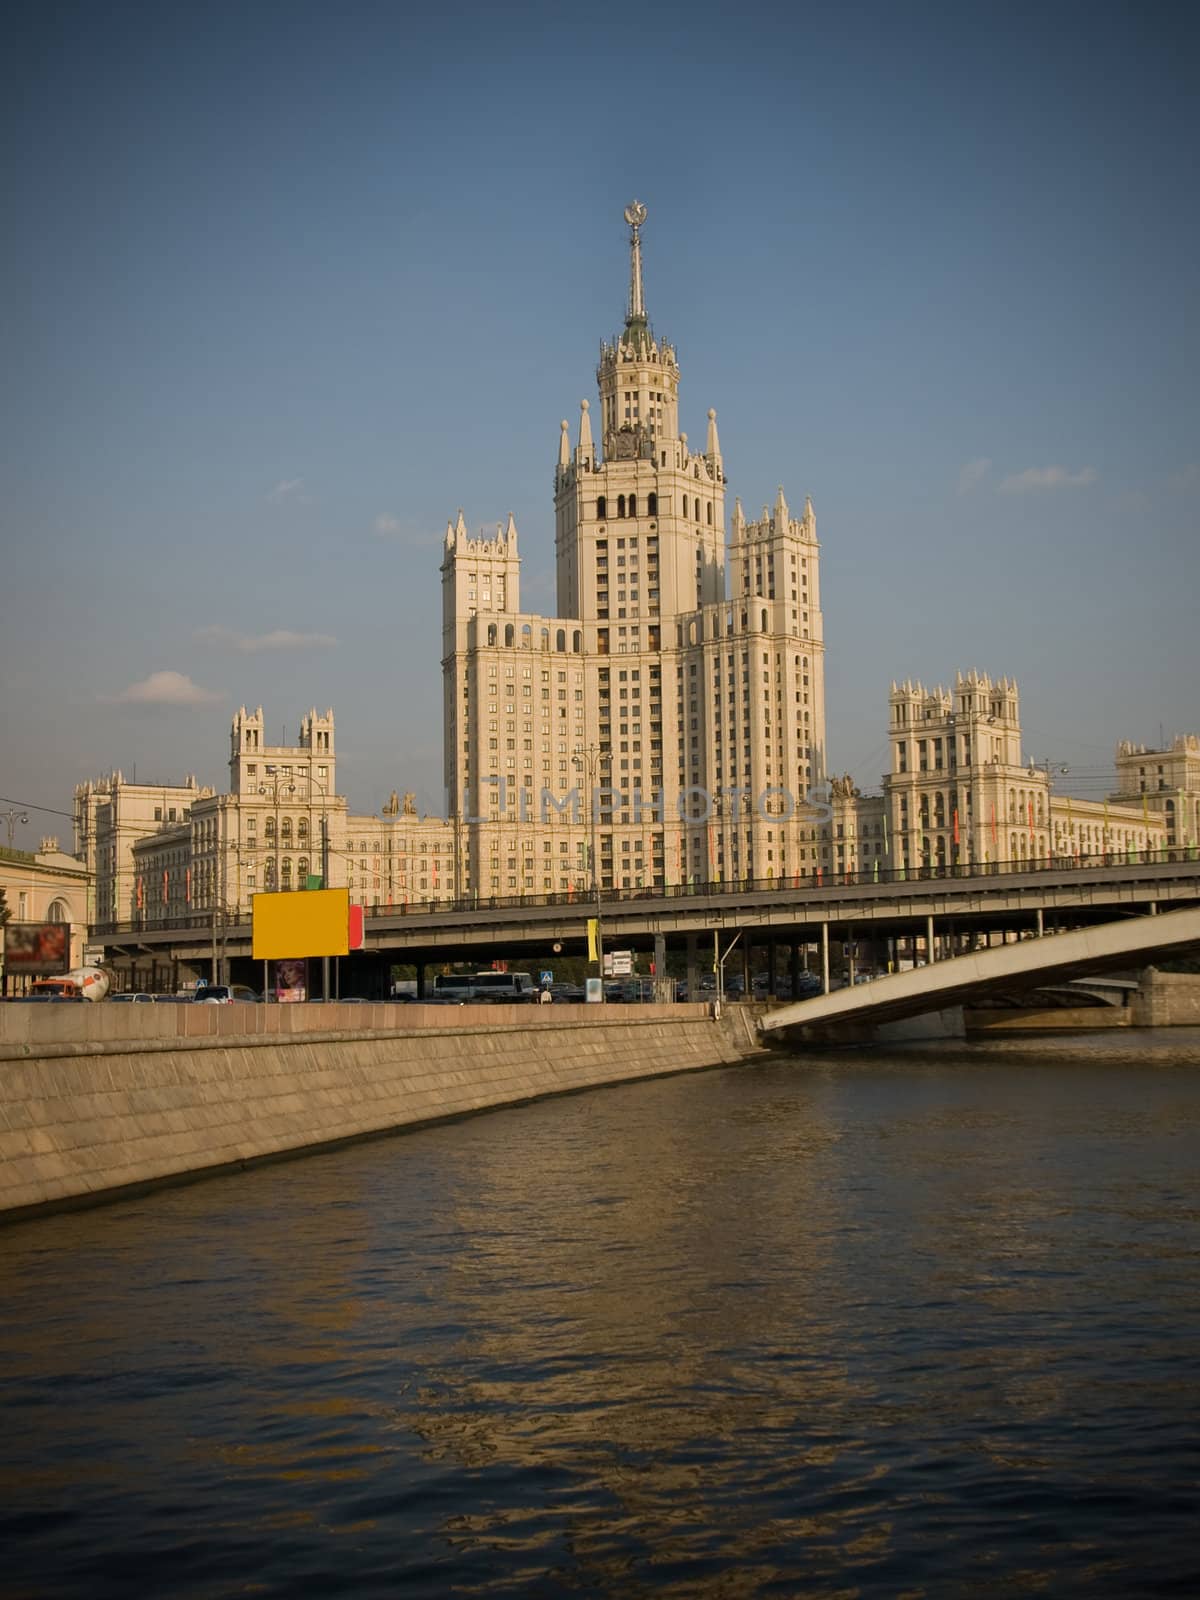 the picture of the russian skyscraper by stalin